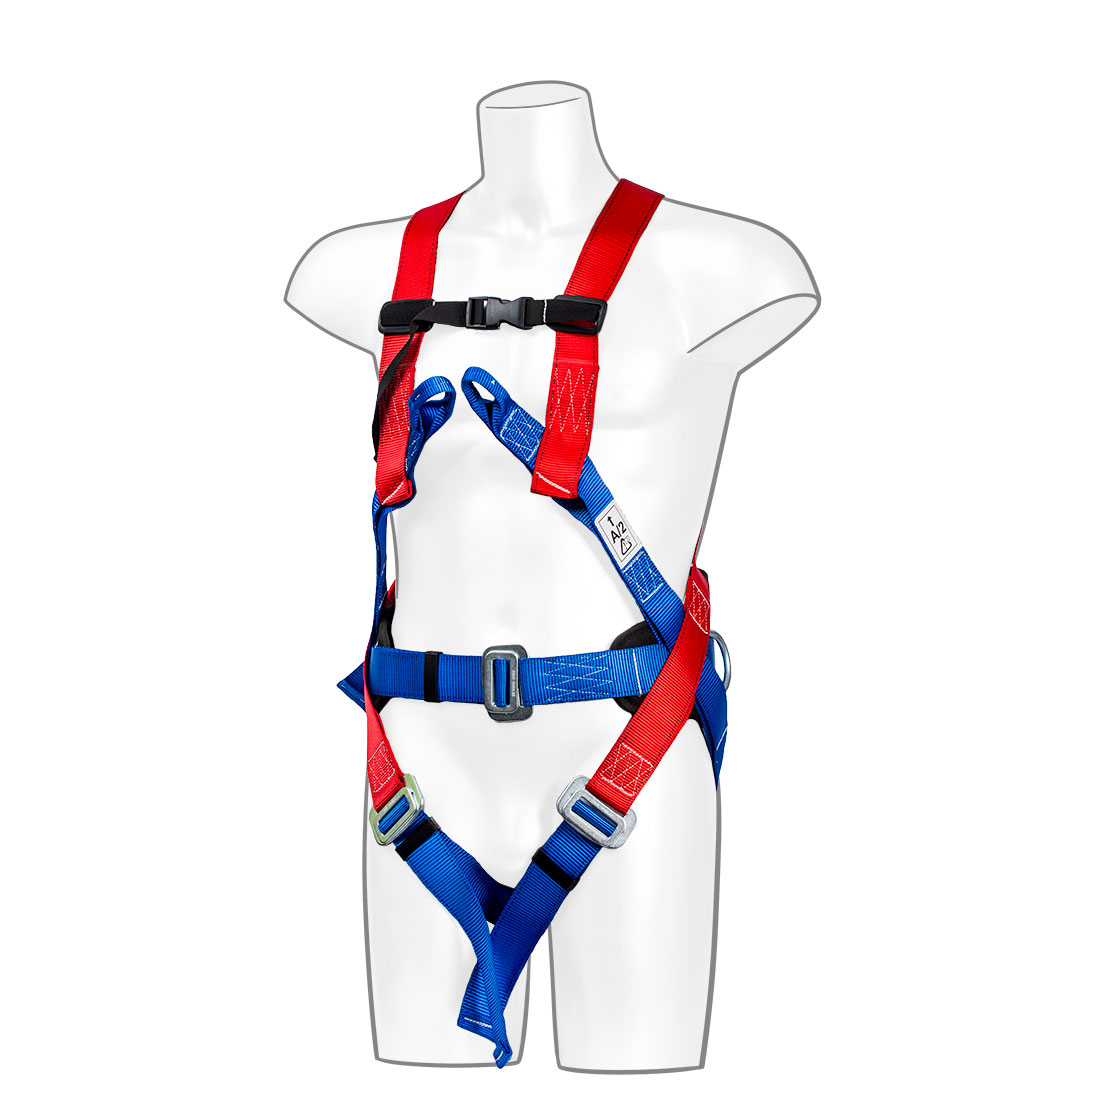 Portwest 3 Point Comfort Harness - Red